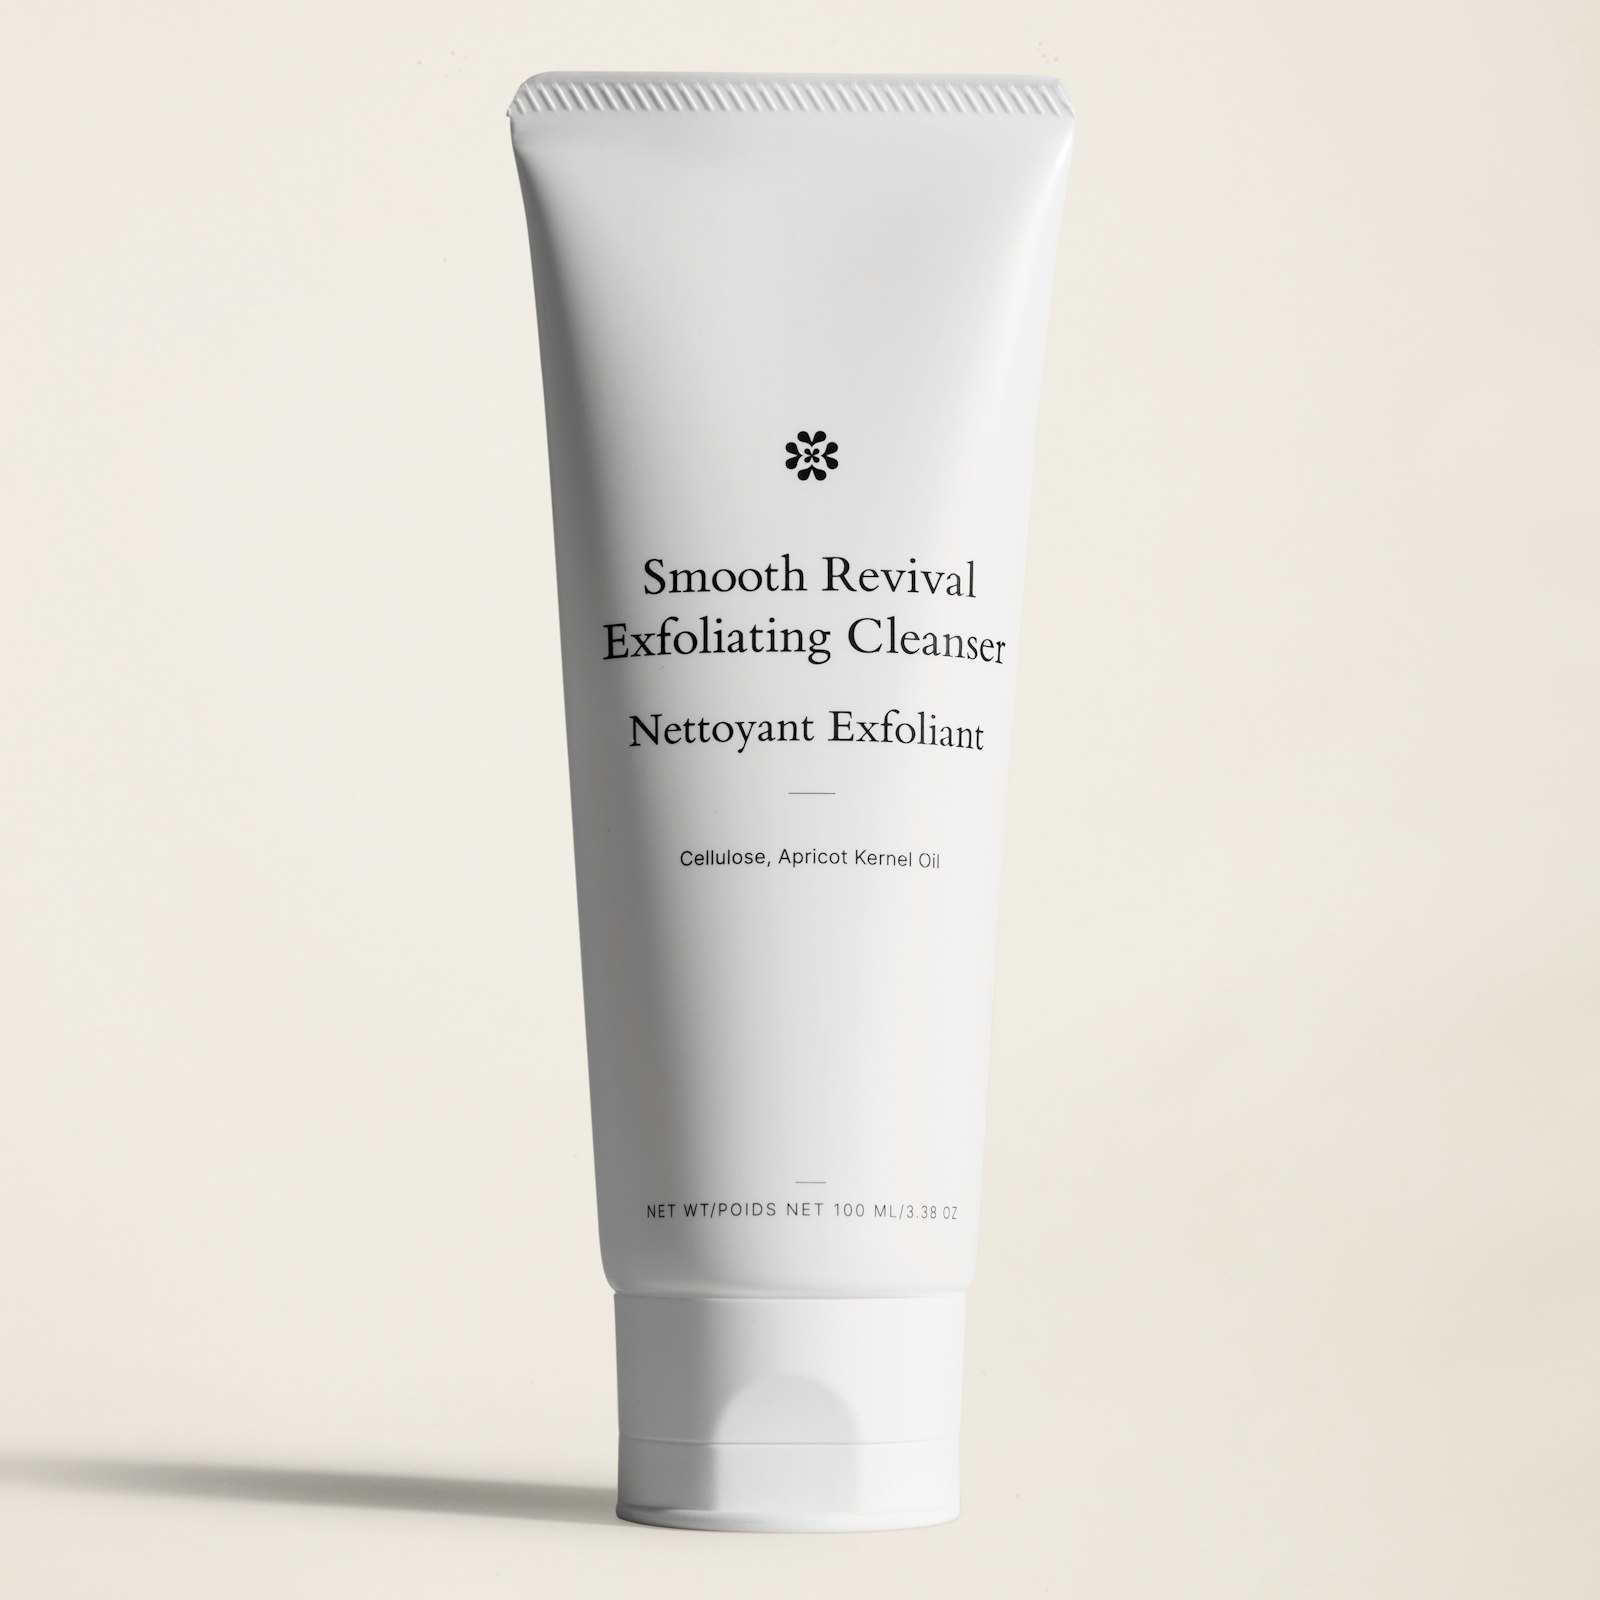 Smooth Revival Exfoliating Cleanser